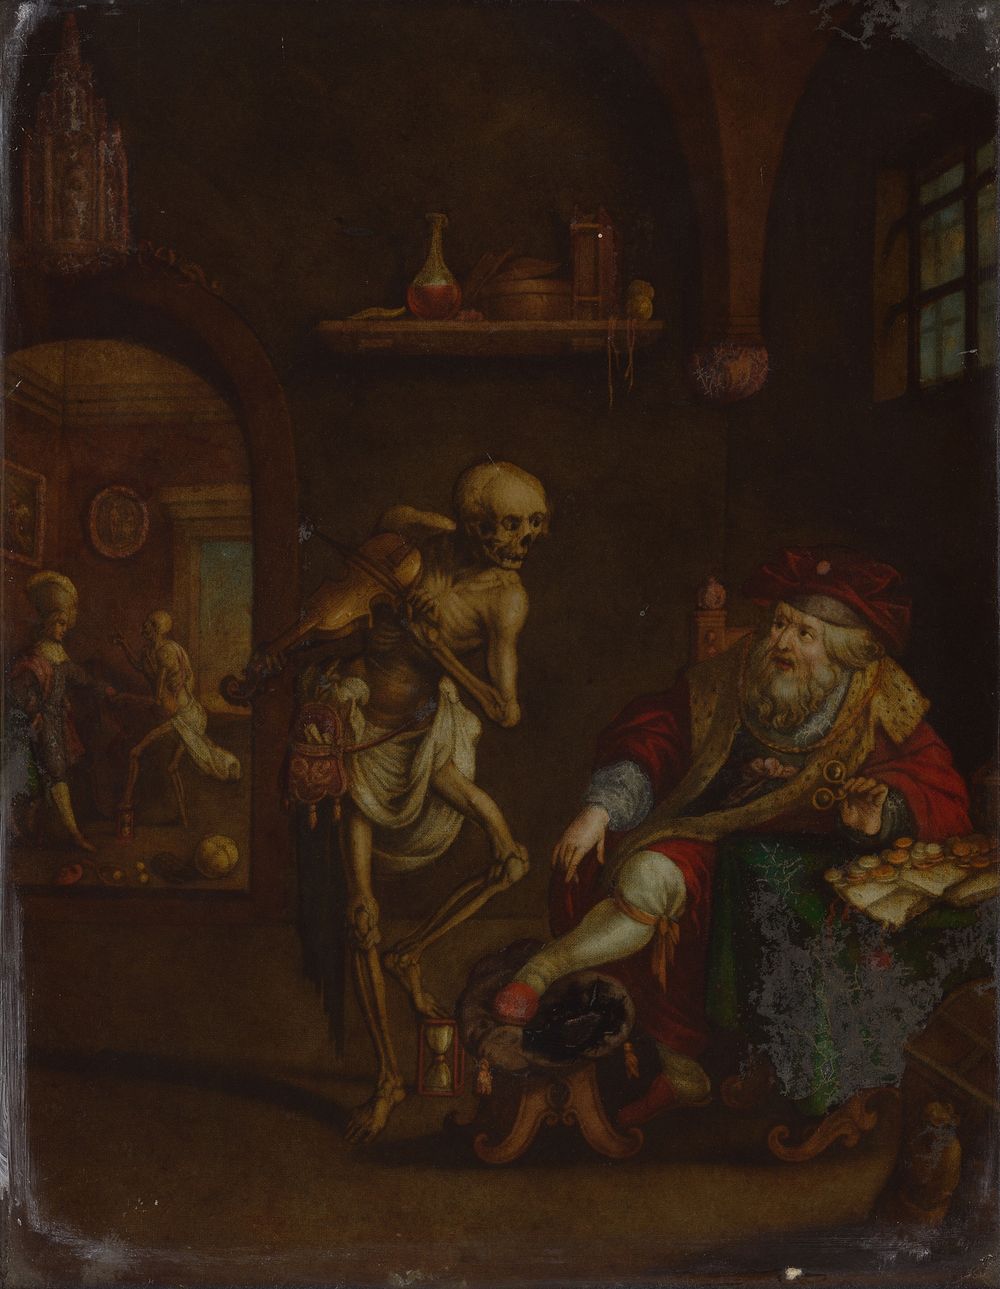 Death and the miser. Oil painting by Frans Francken II.